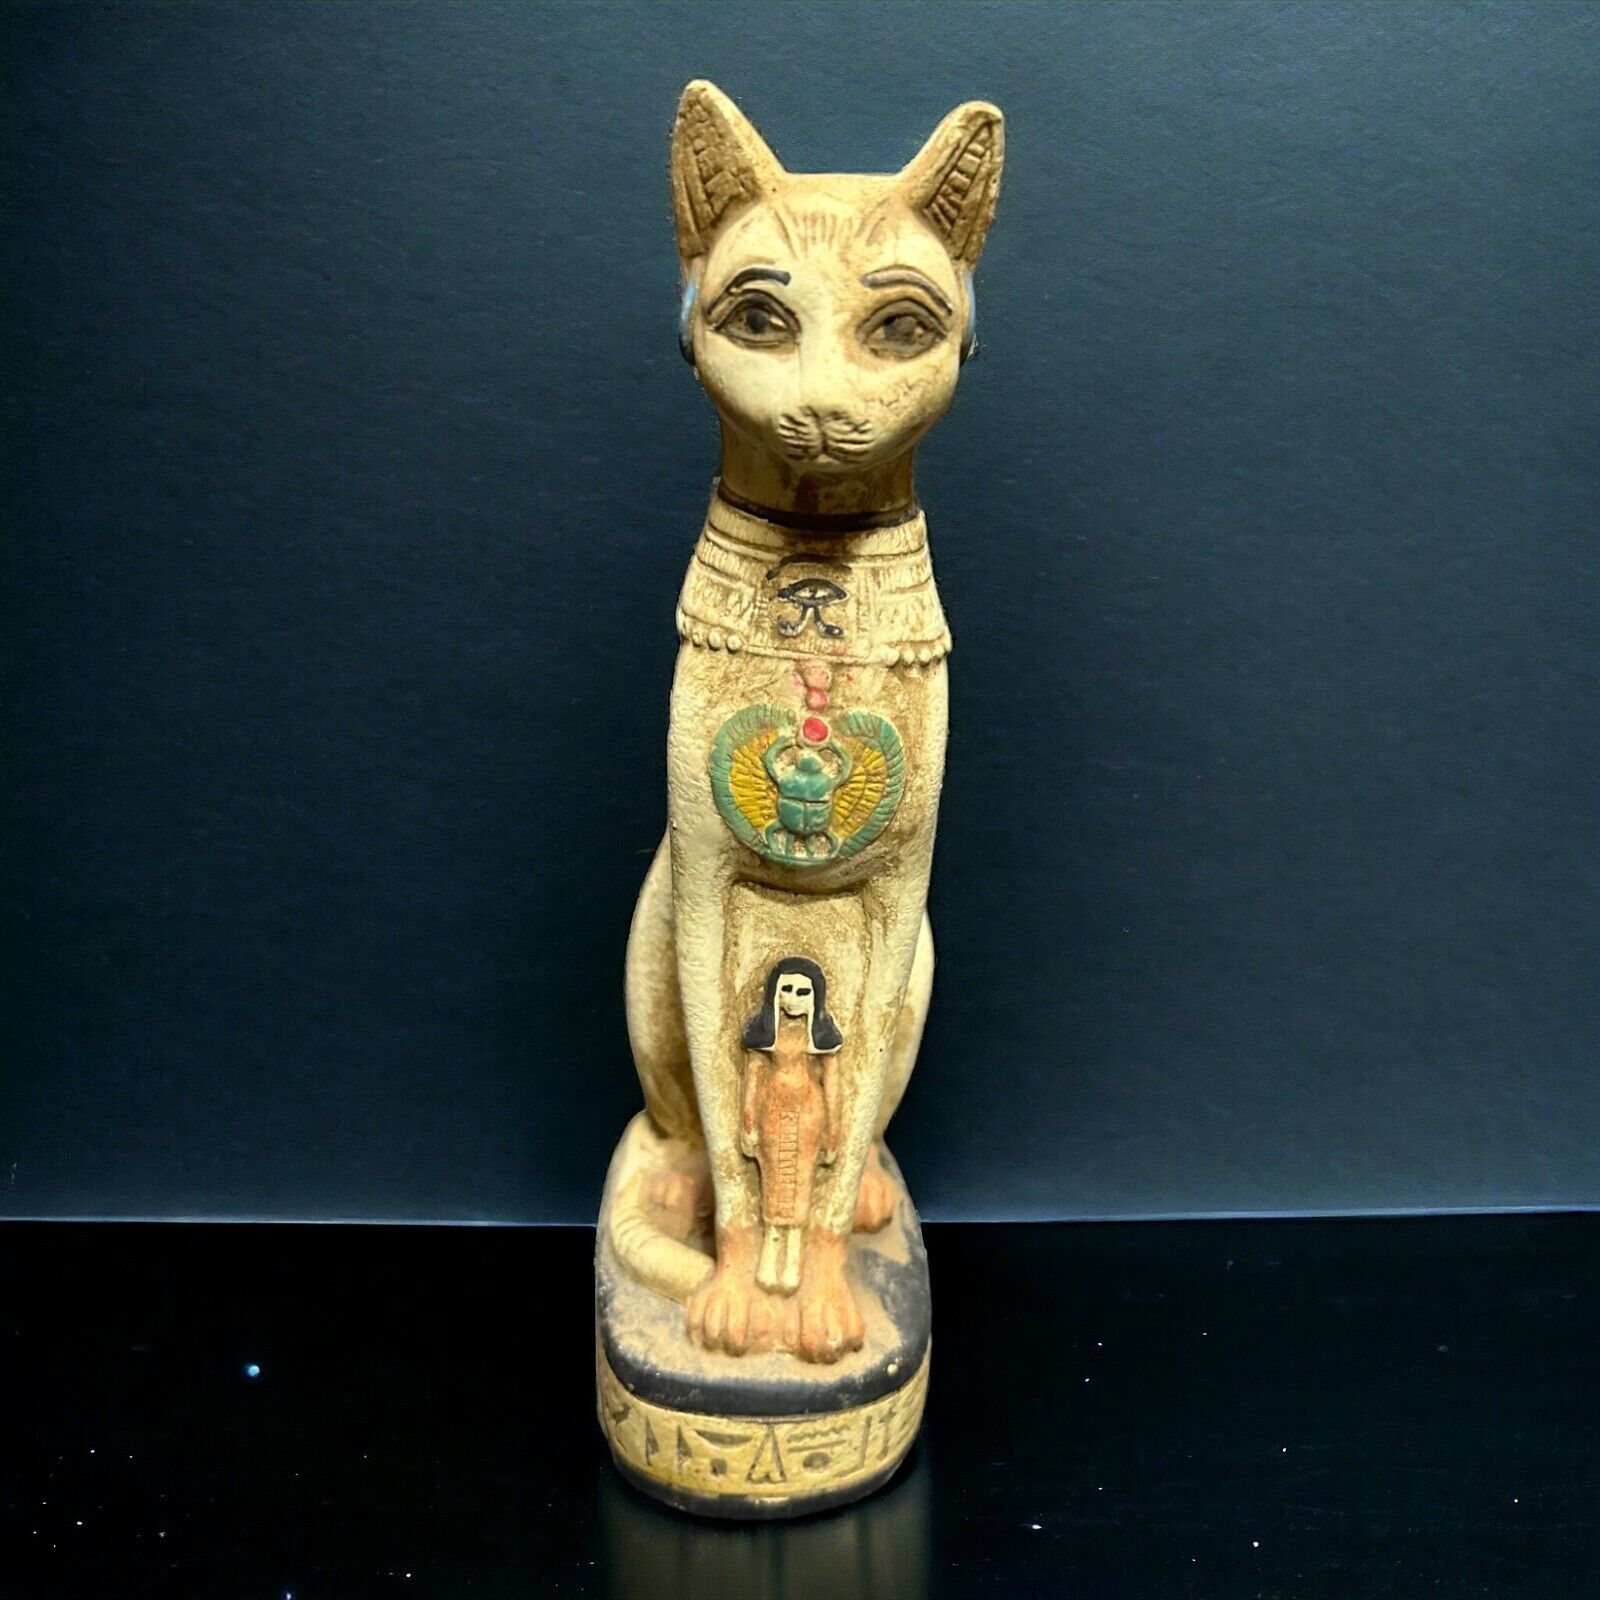 ANTIQUITIES Rare Statue of Bastet Cat Ancient Egyptian Pharaonic Egyptian BC